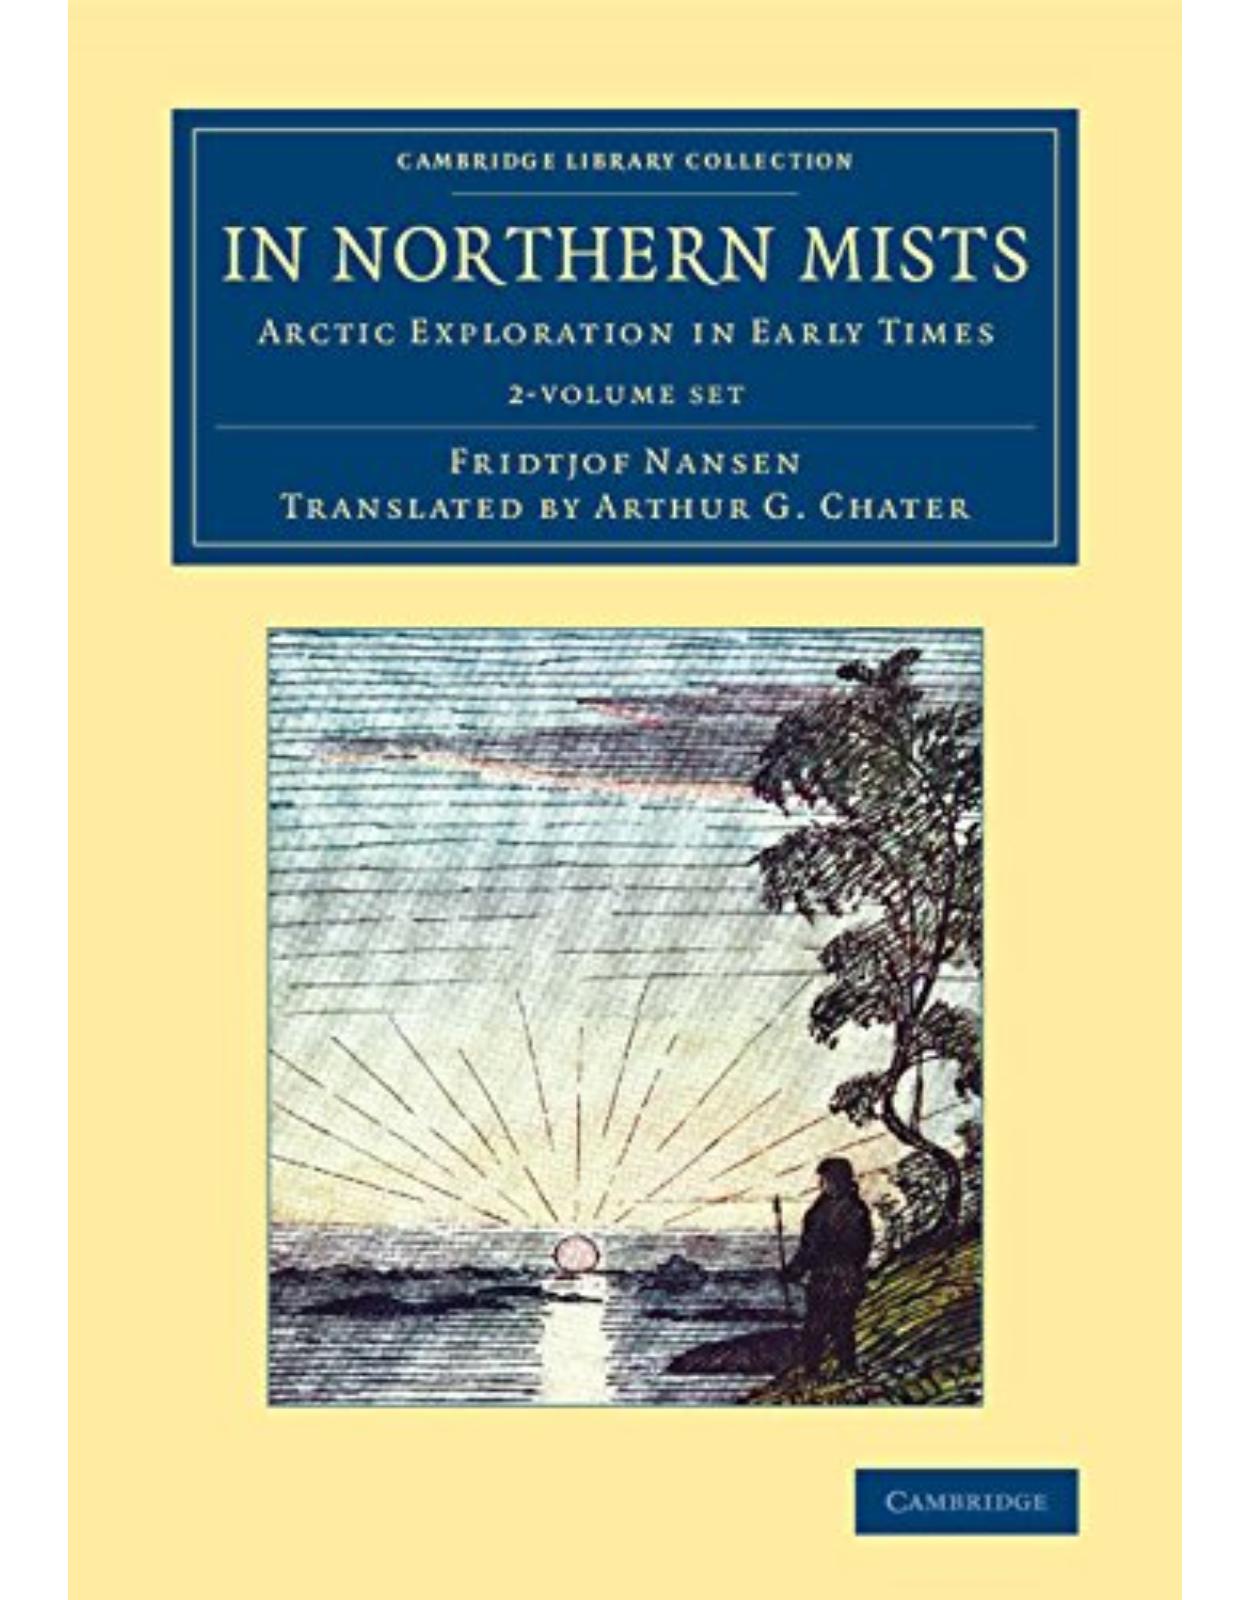 In Northern Mists 2 Volume Set: Arctic Exploration in Early Times (Cambridge Library Collection - Polar Exploration) 